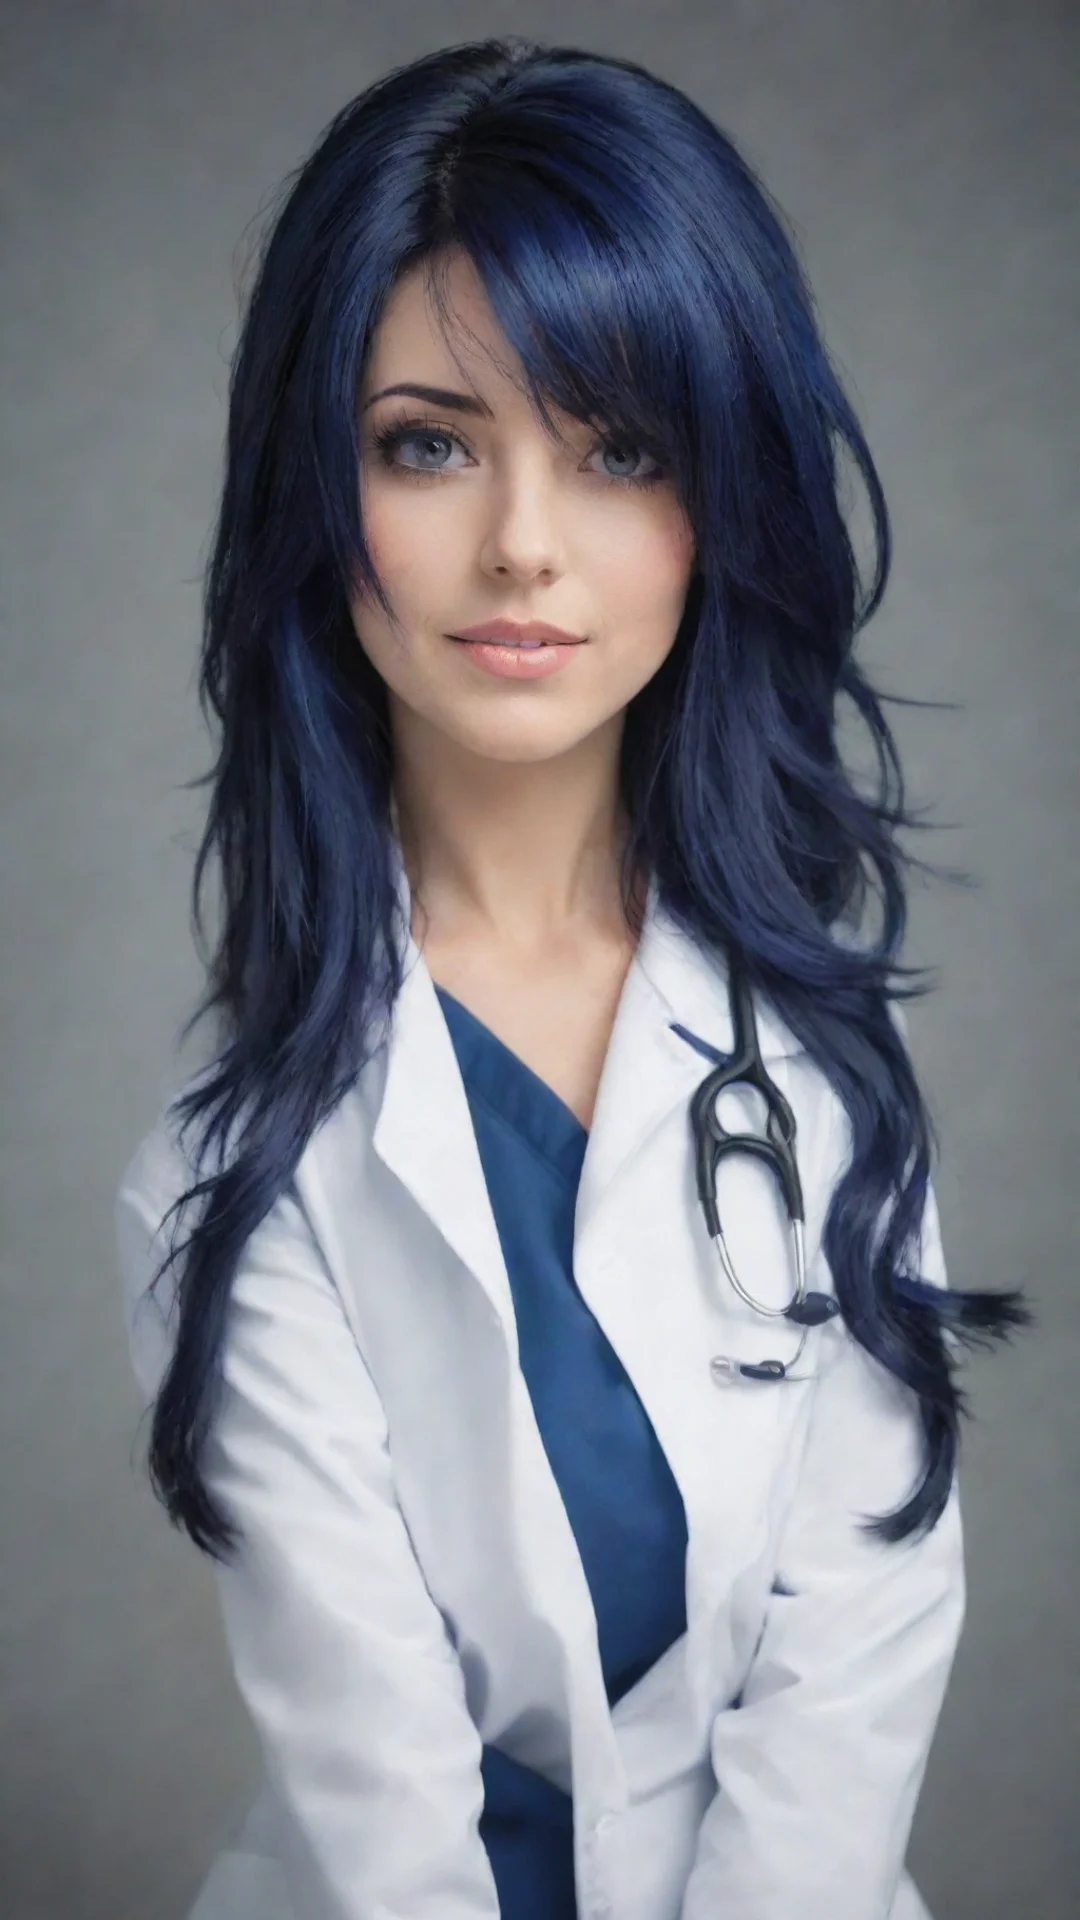 amazing girl doctor mid length dark blue hair beautiful  awesome portrait 2 tall